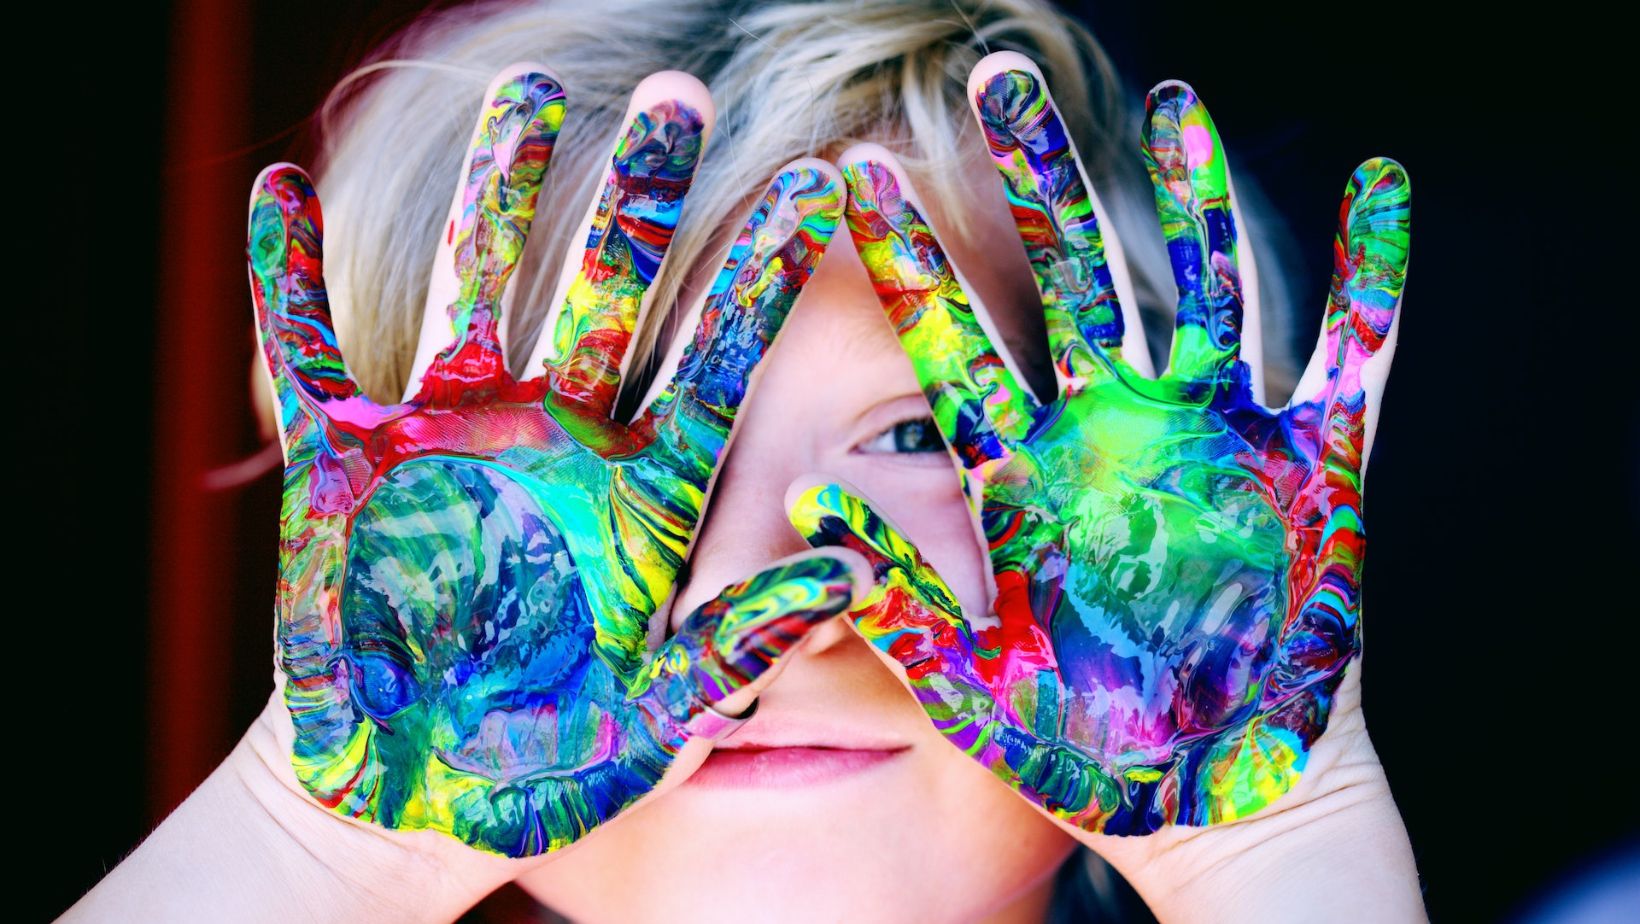 A boy whose hands are covered in paint